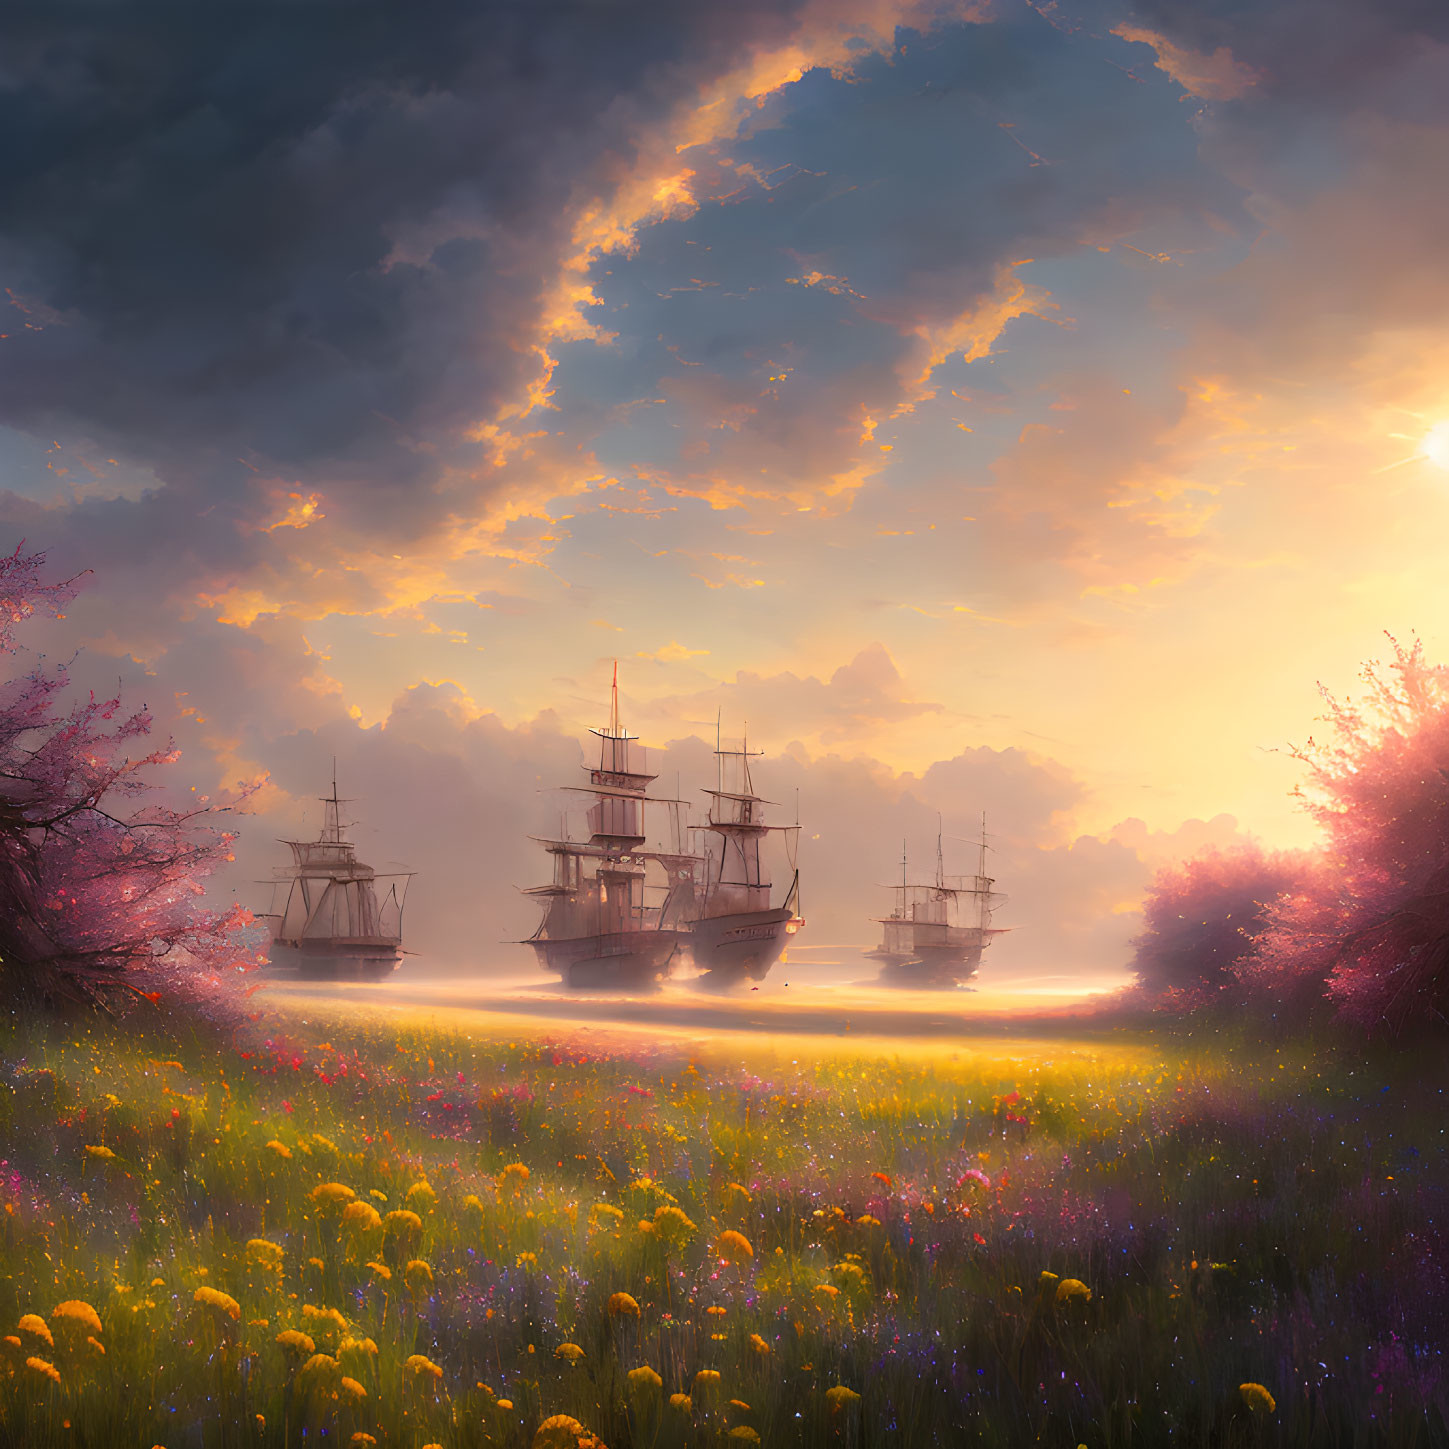 Sailboats on serene sea under sunset sky with blooming fields